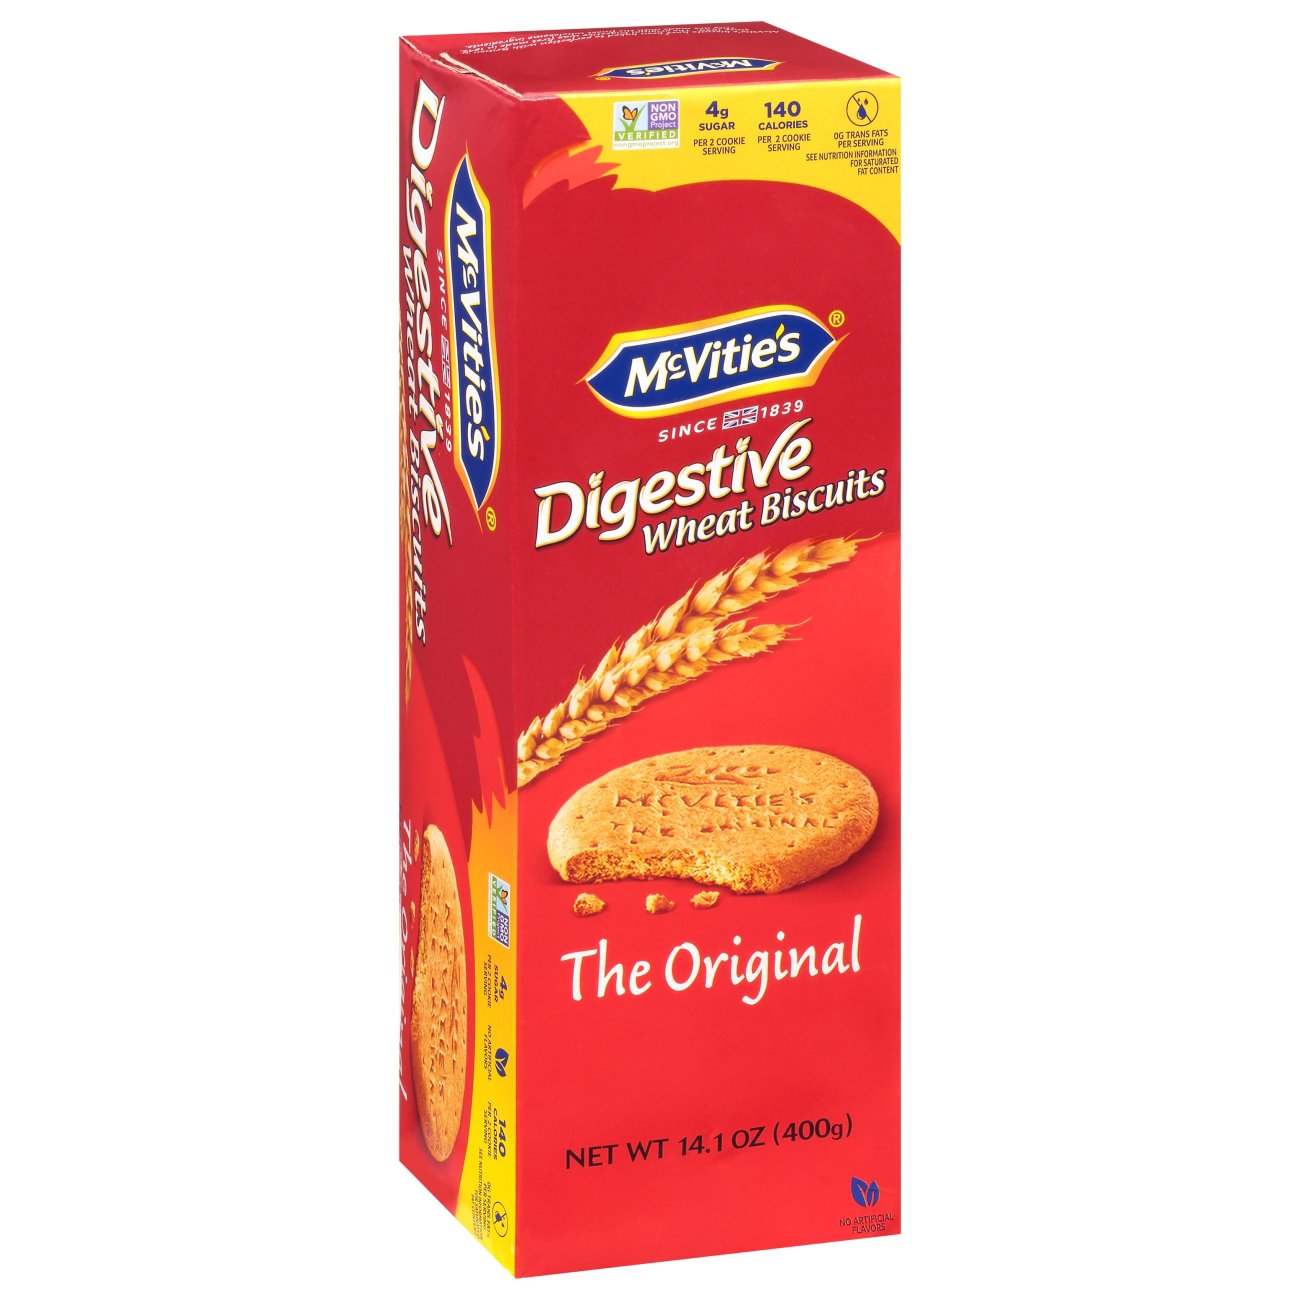 Mcvitie'S Digestive High Fibre Biscuits With Goodness Of